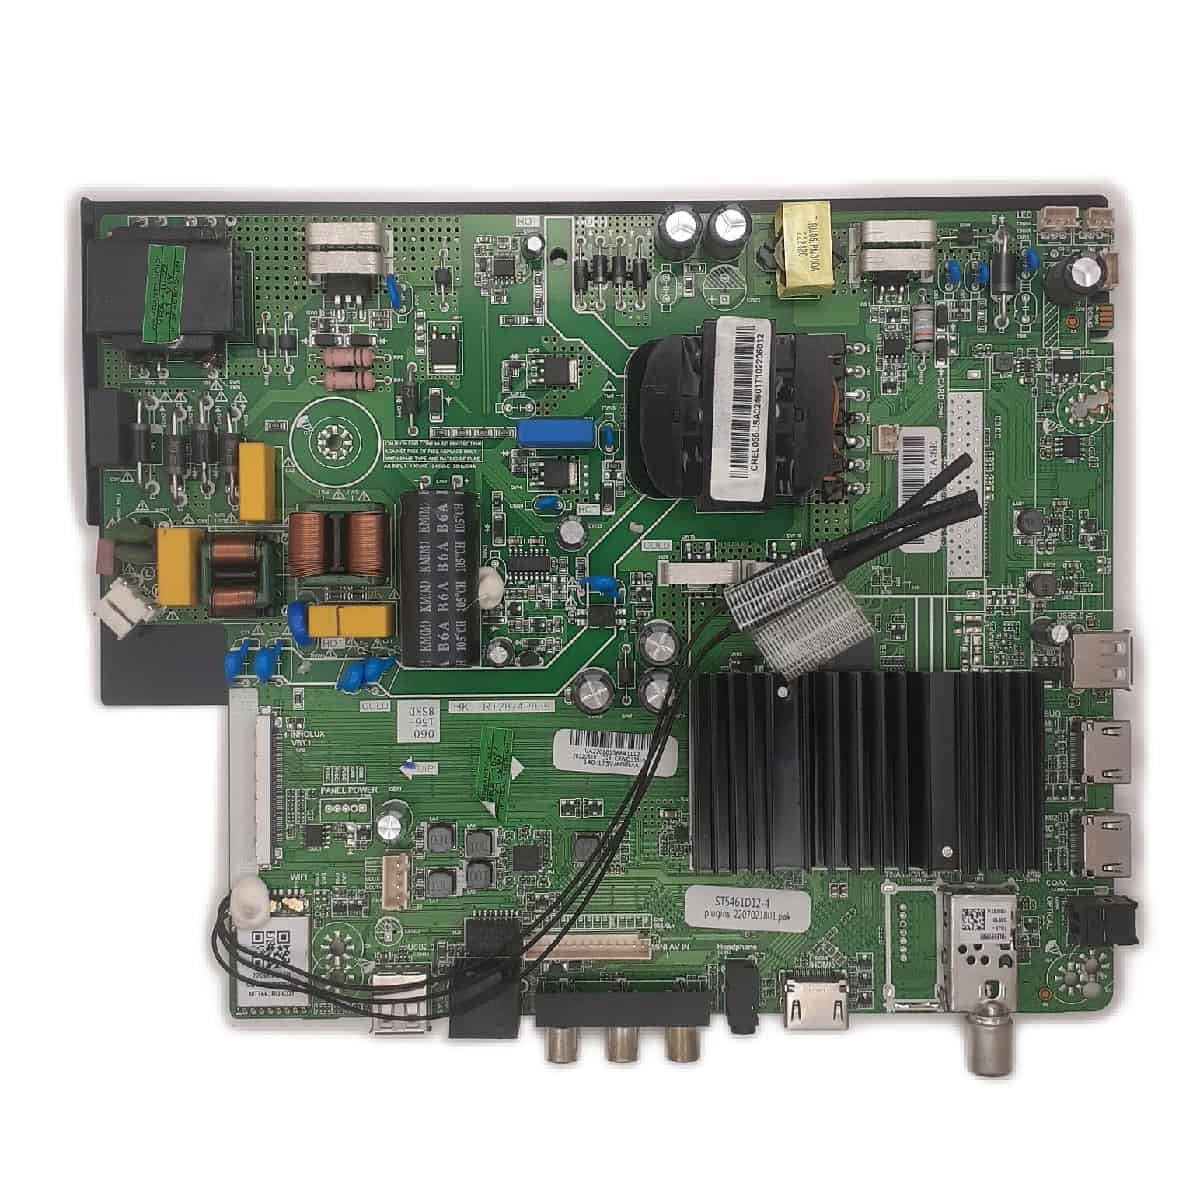 CREL055USA02461 CROMA MOTHERBOARD FOR LED TV